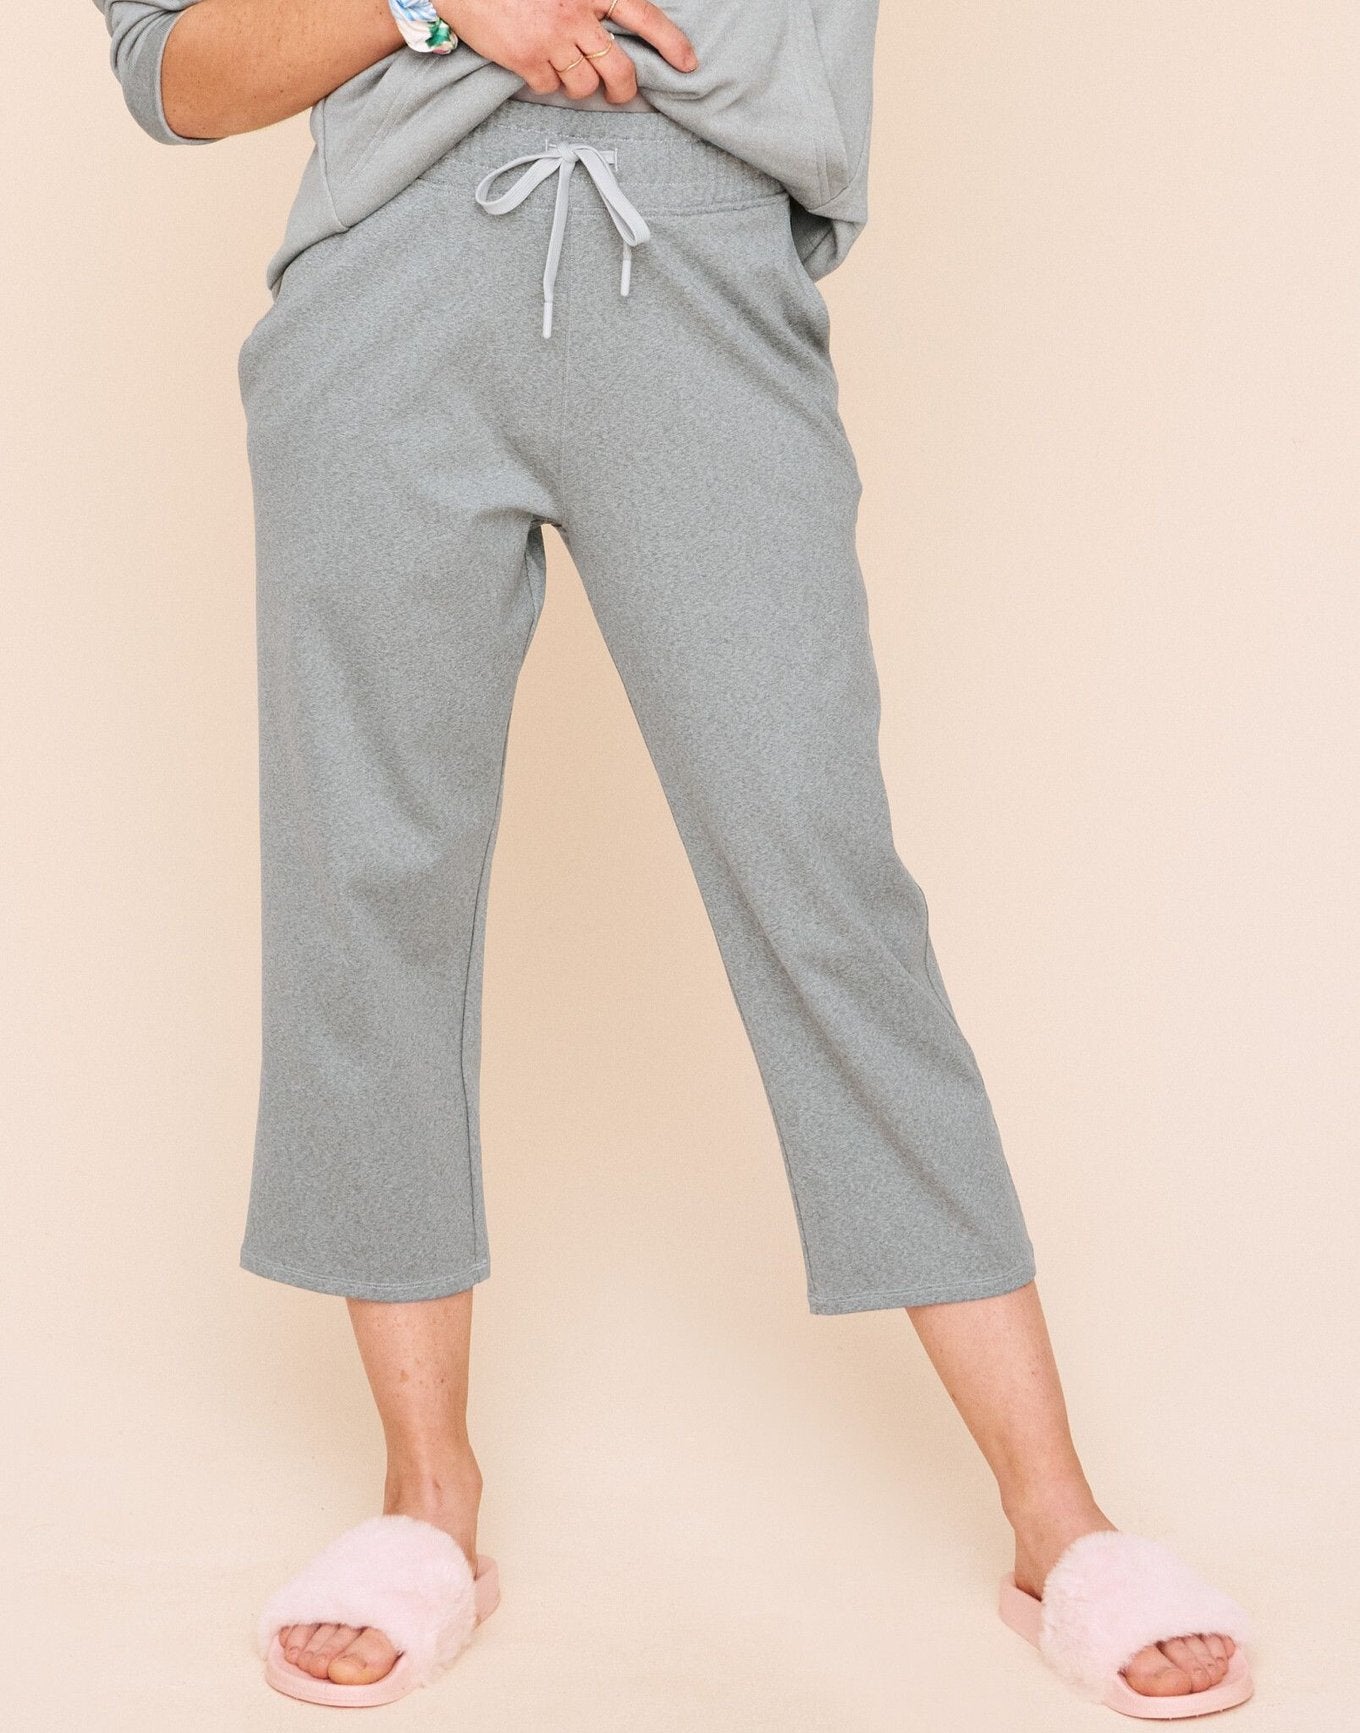 Earth Republic Jaelyn Cropped Pant Cropped Pant in color Oyster Mushroom Marl and shape pant